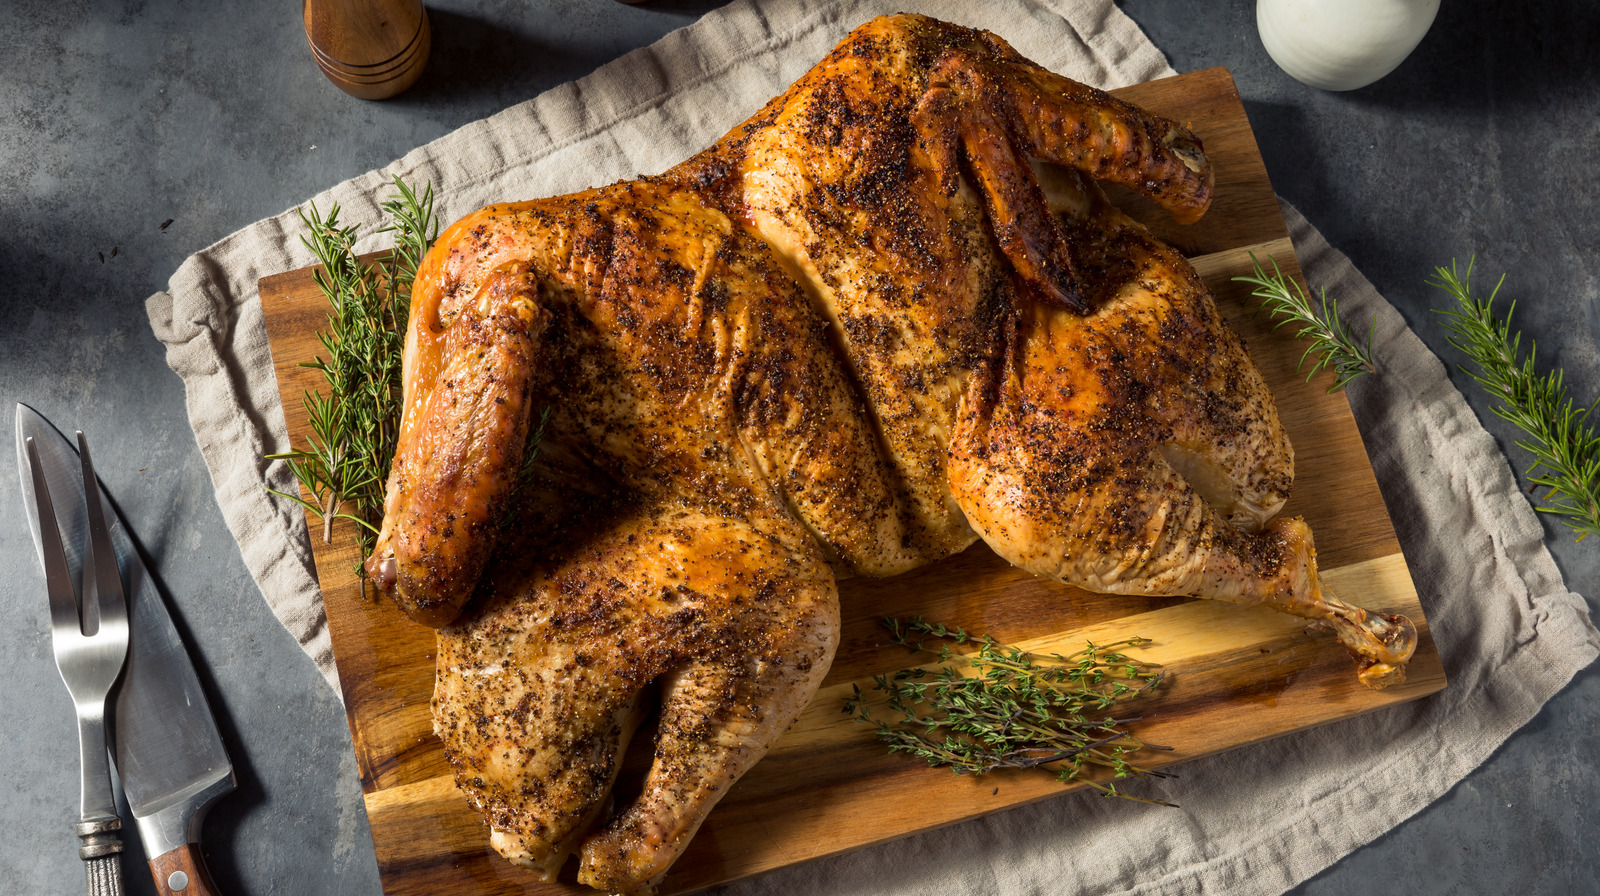 Ina Garten's spatchcocking tip for an evenly grilled whole chicken